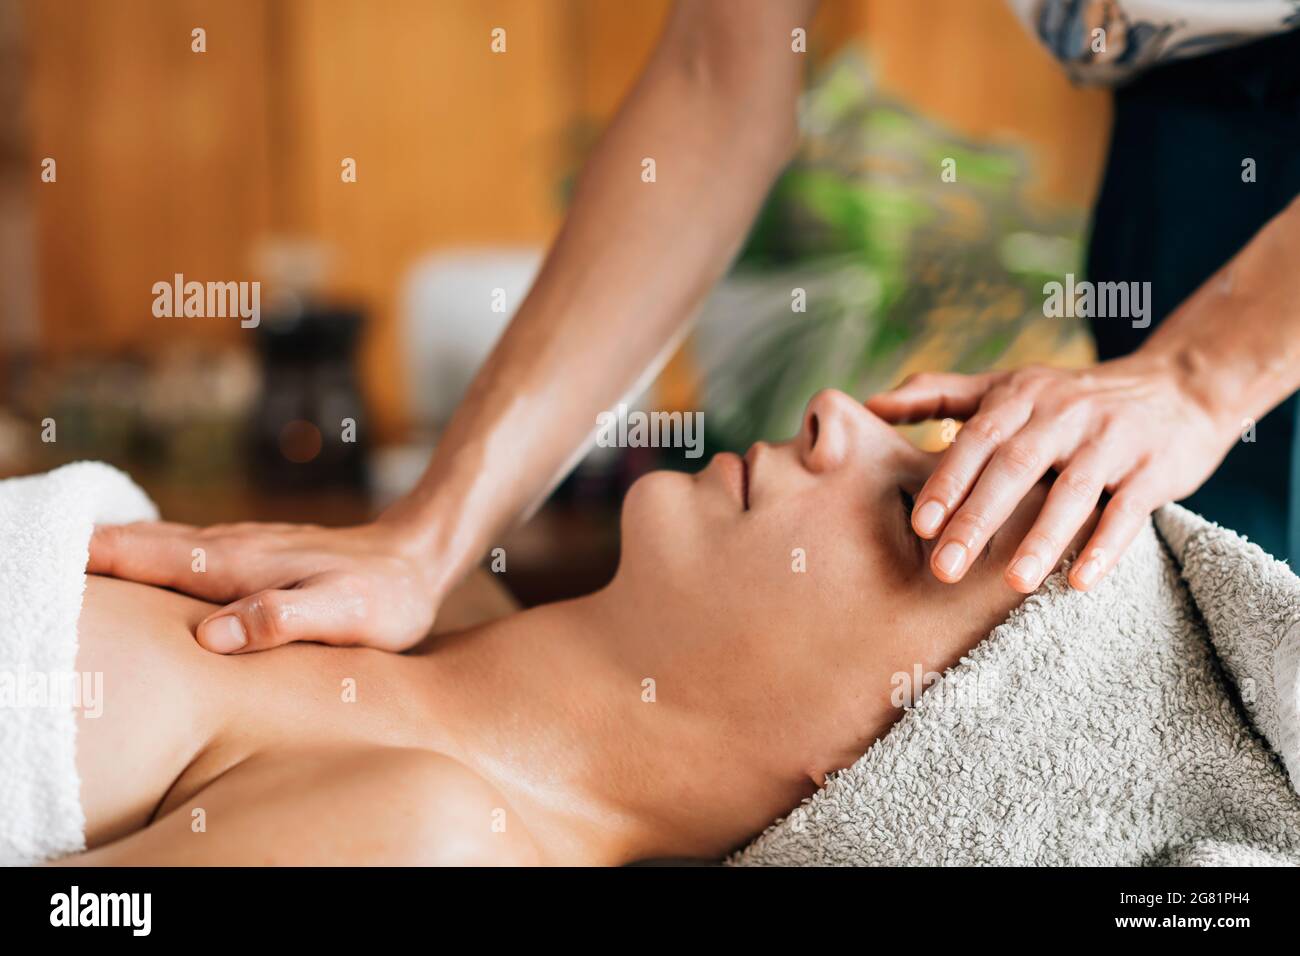 Chest Massage High Resolution Stock Photography and Images - Alamy